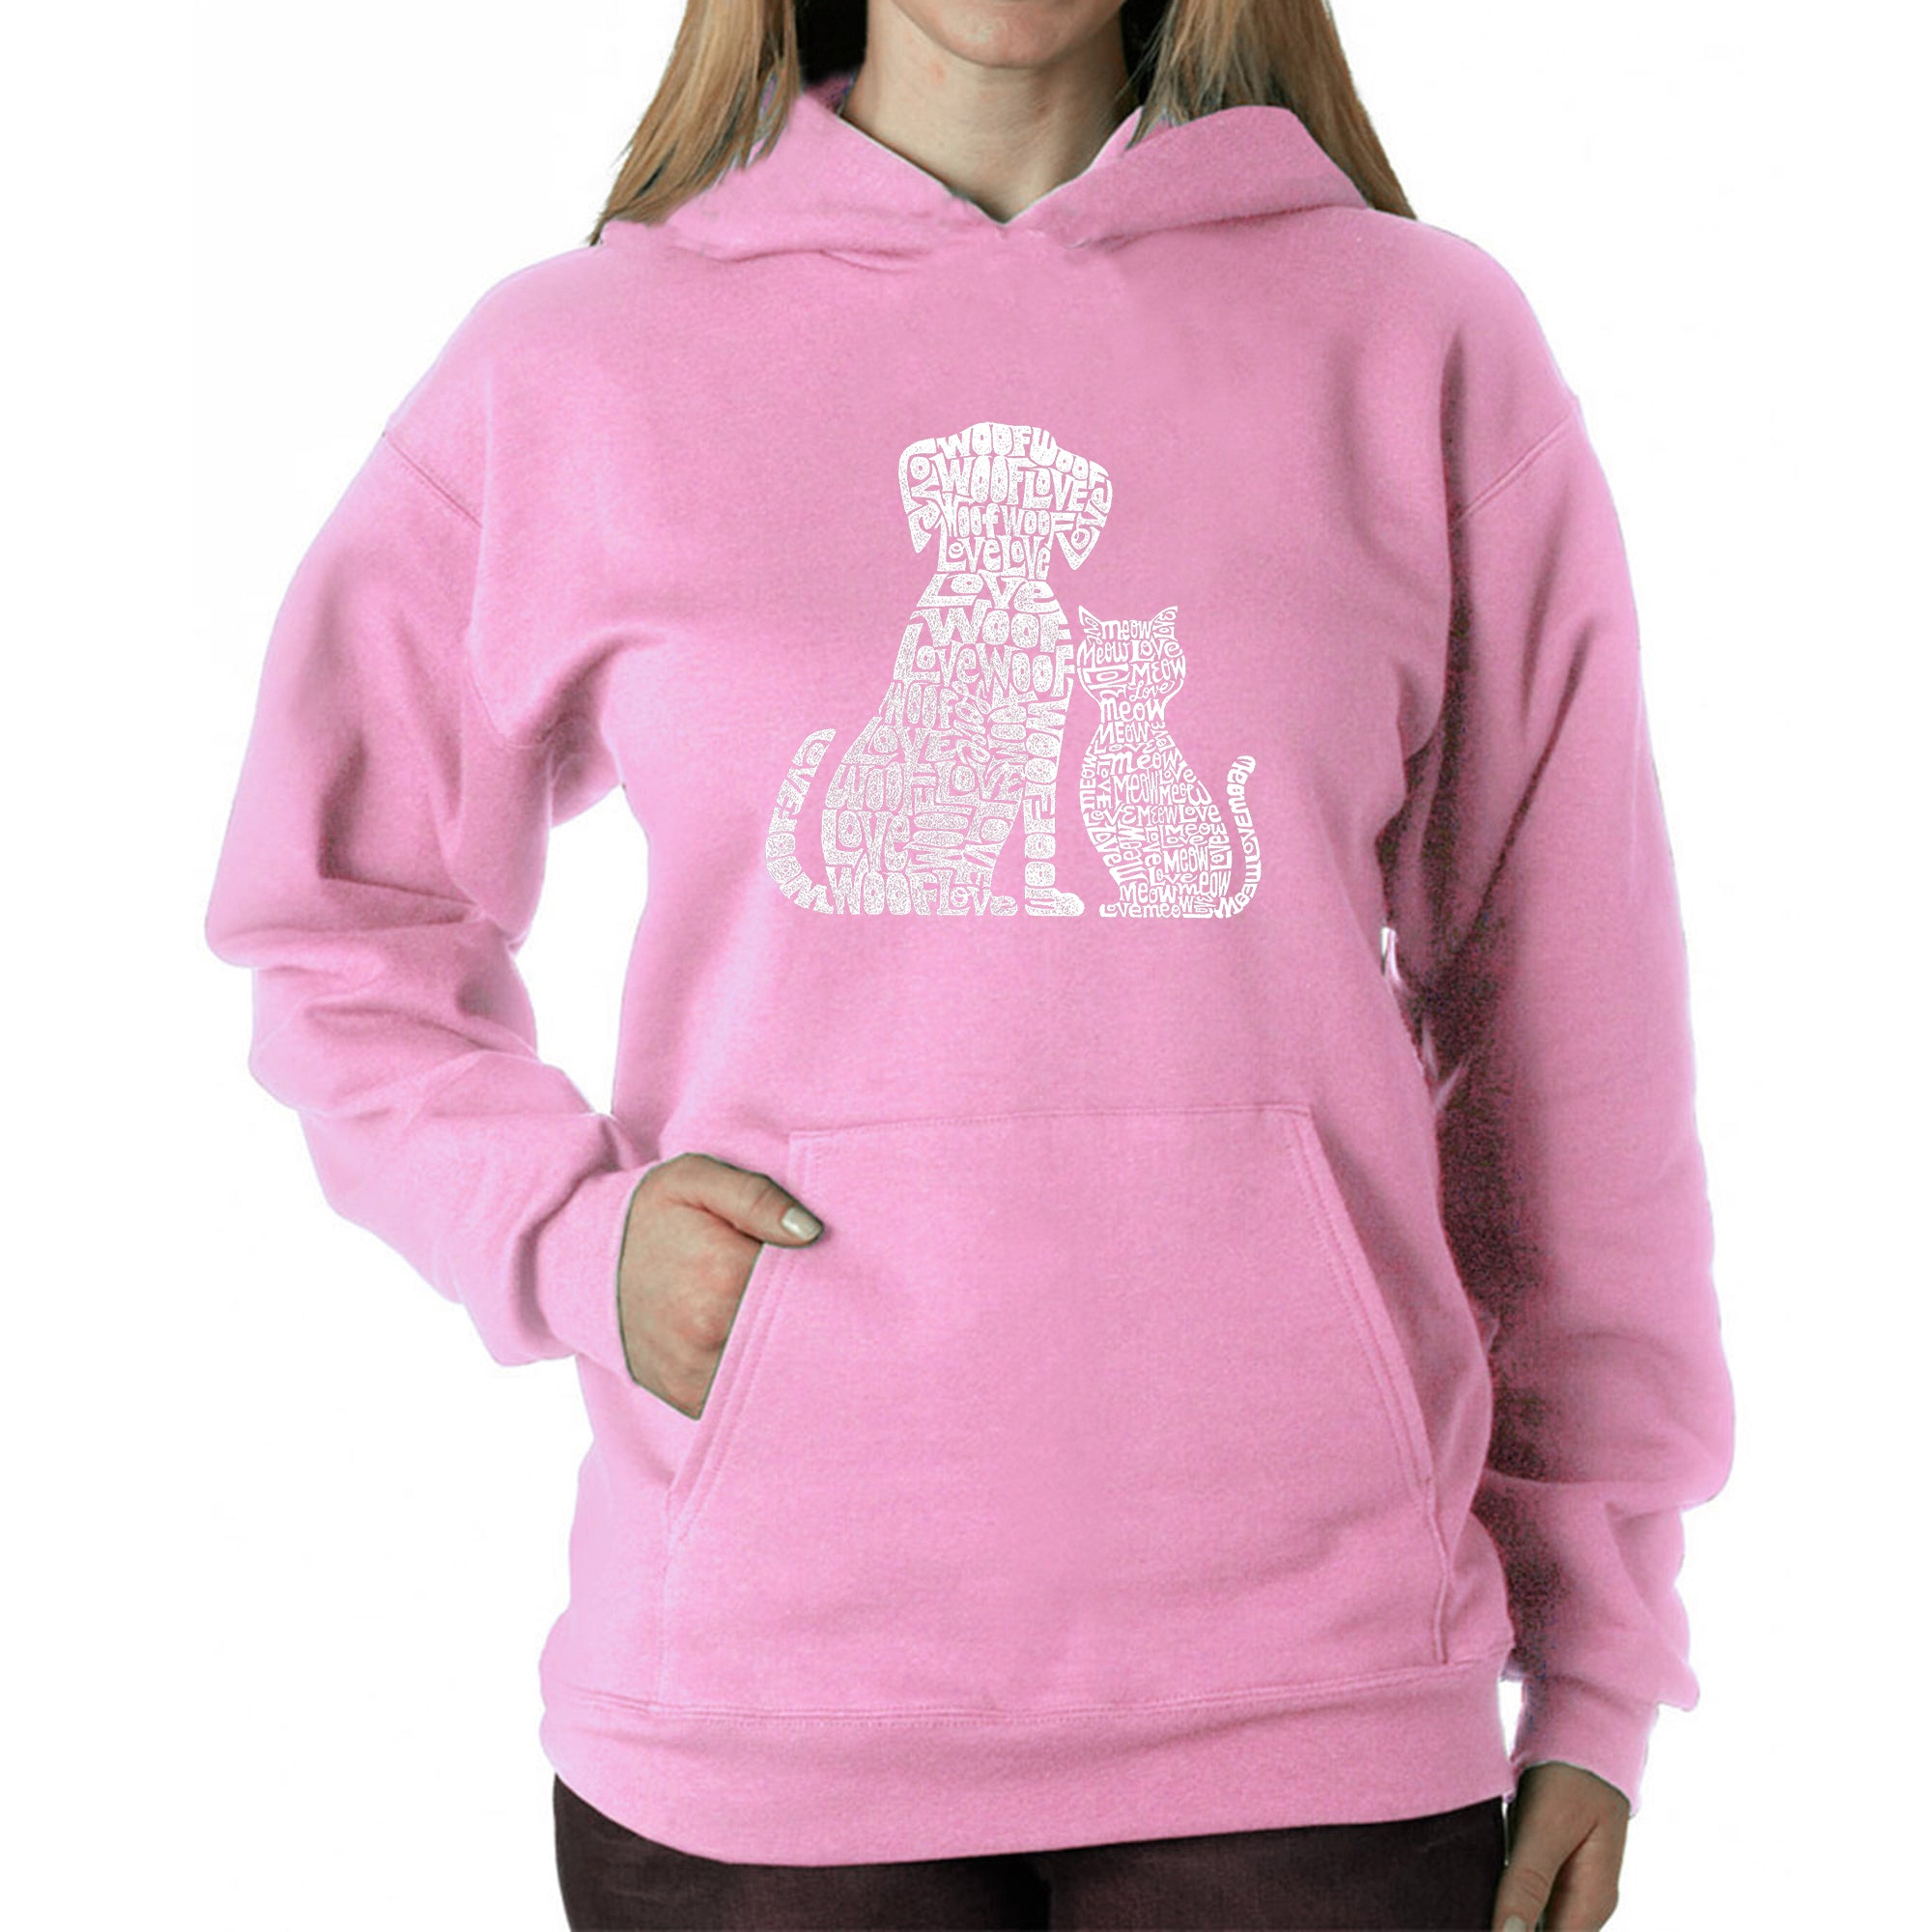 Dogs And Cats - Women's Word Art Hooded Sweatshirt - Pink - XXXX-Large